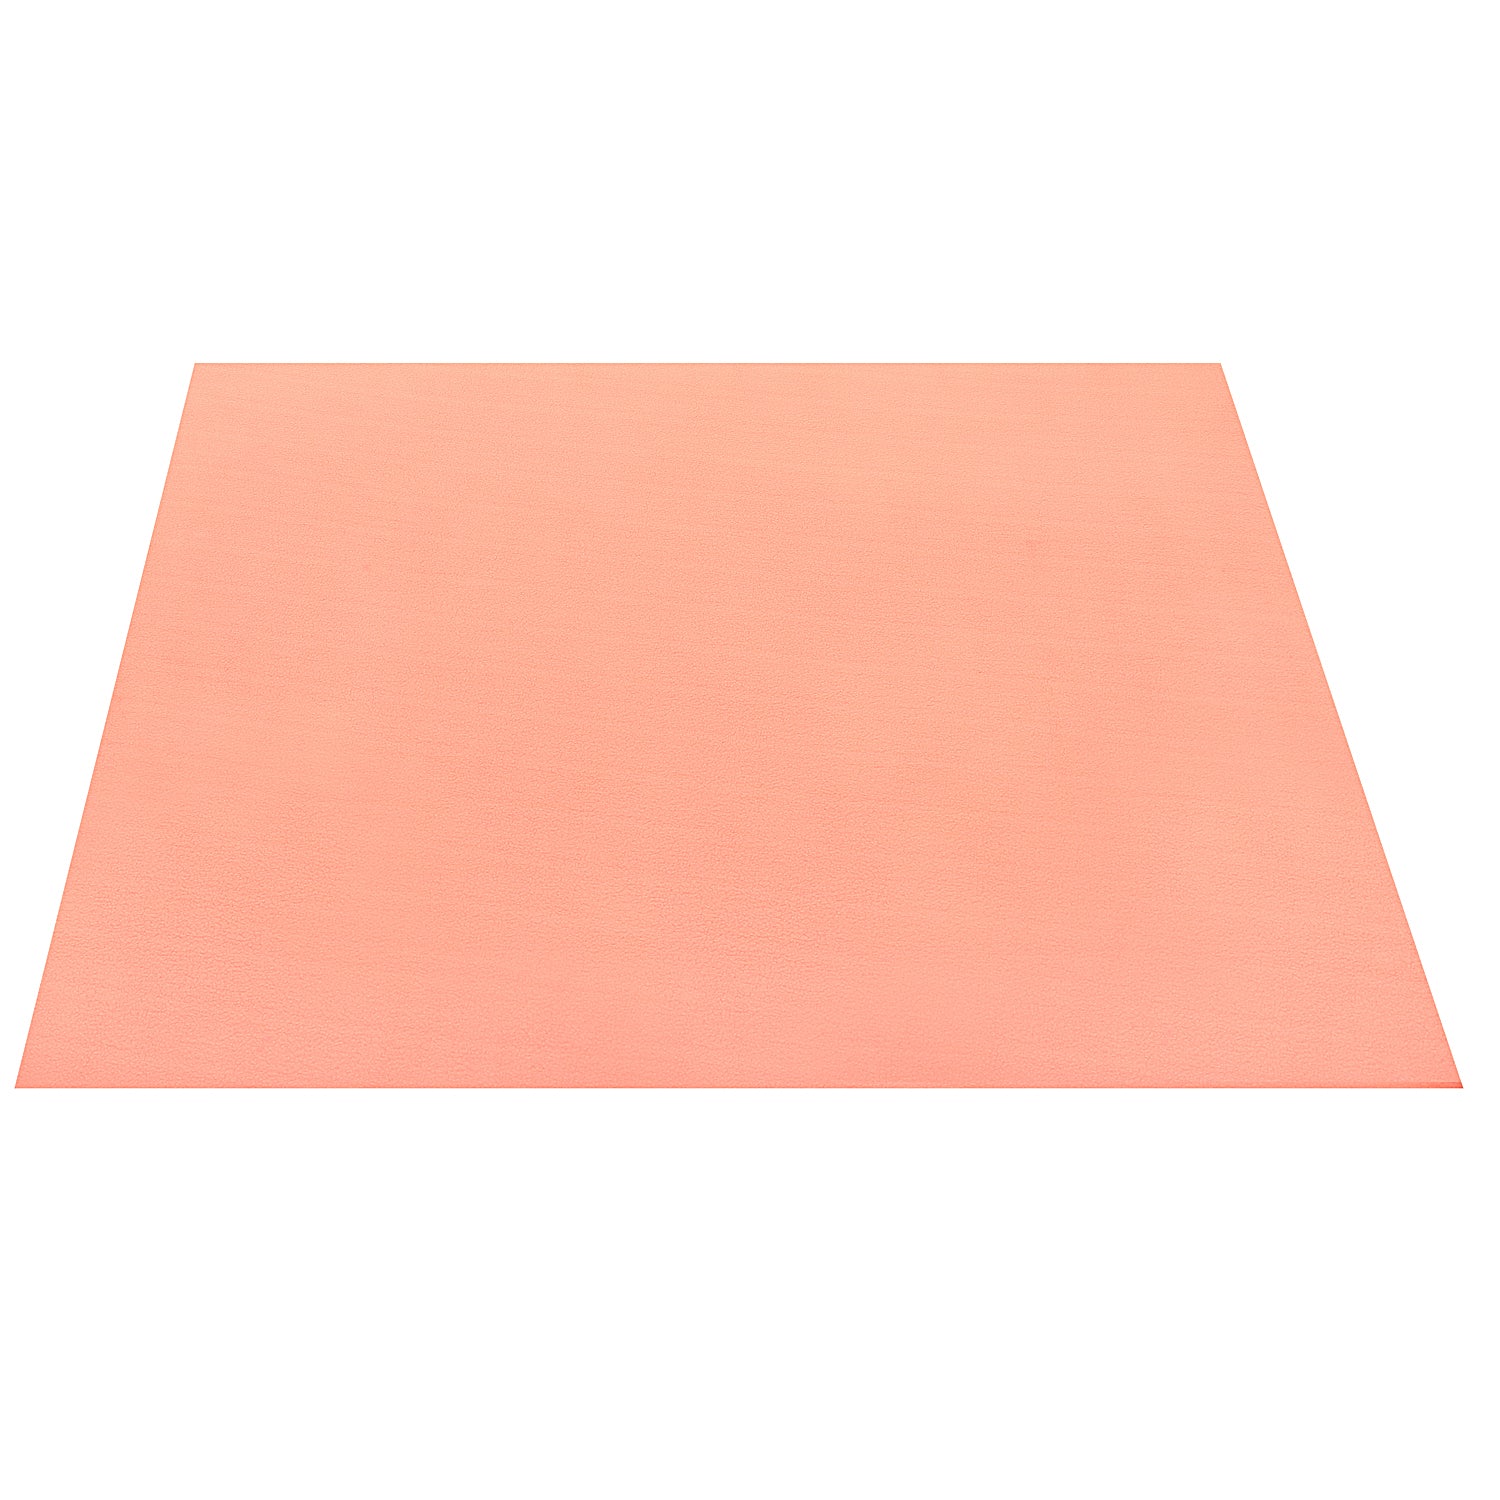 Plain Orange Water-Resistant Bed Protector - 3 Sizes - Baby Moo